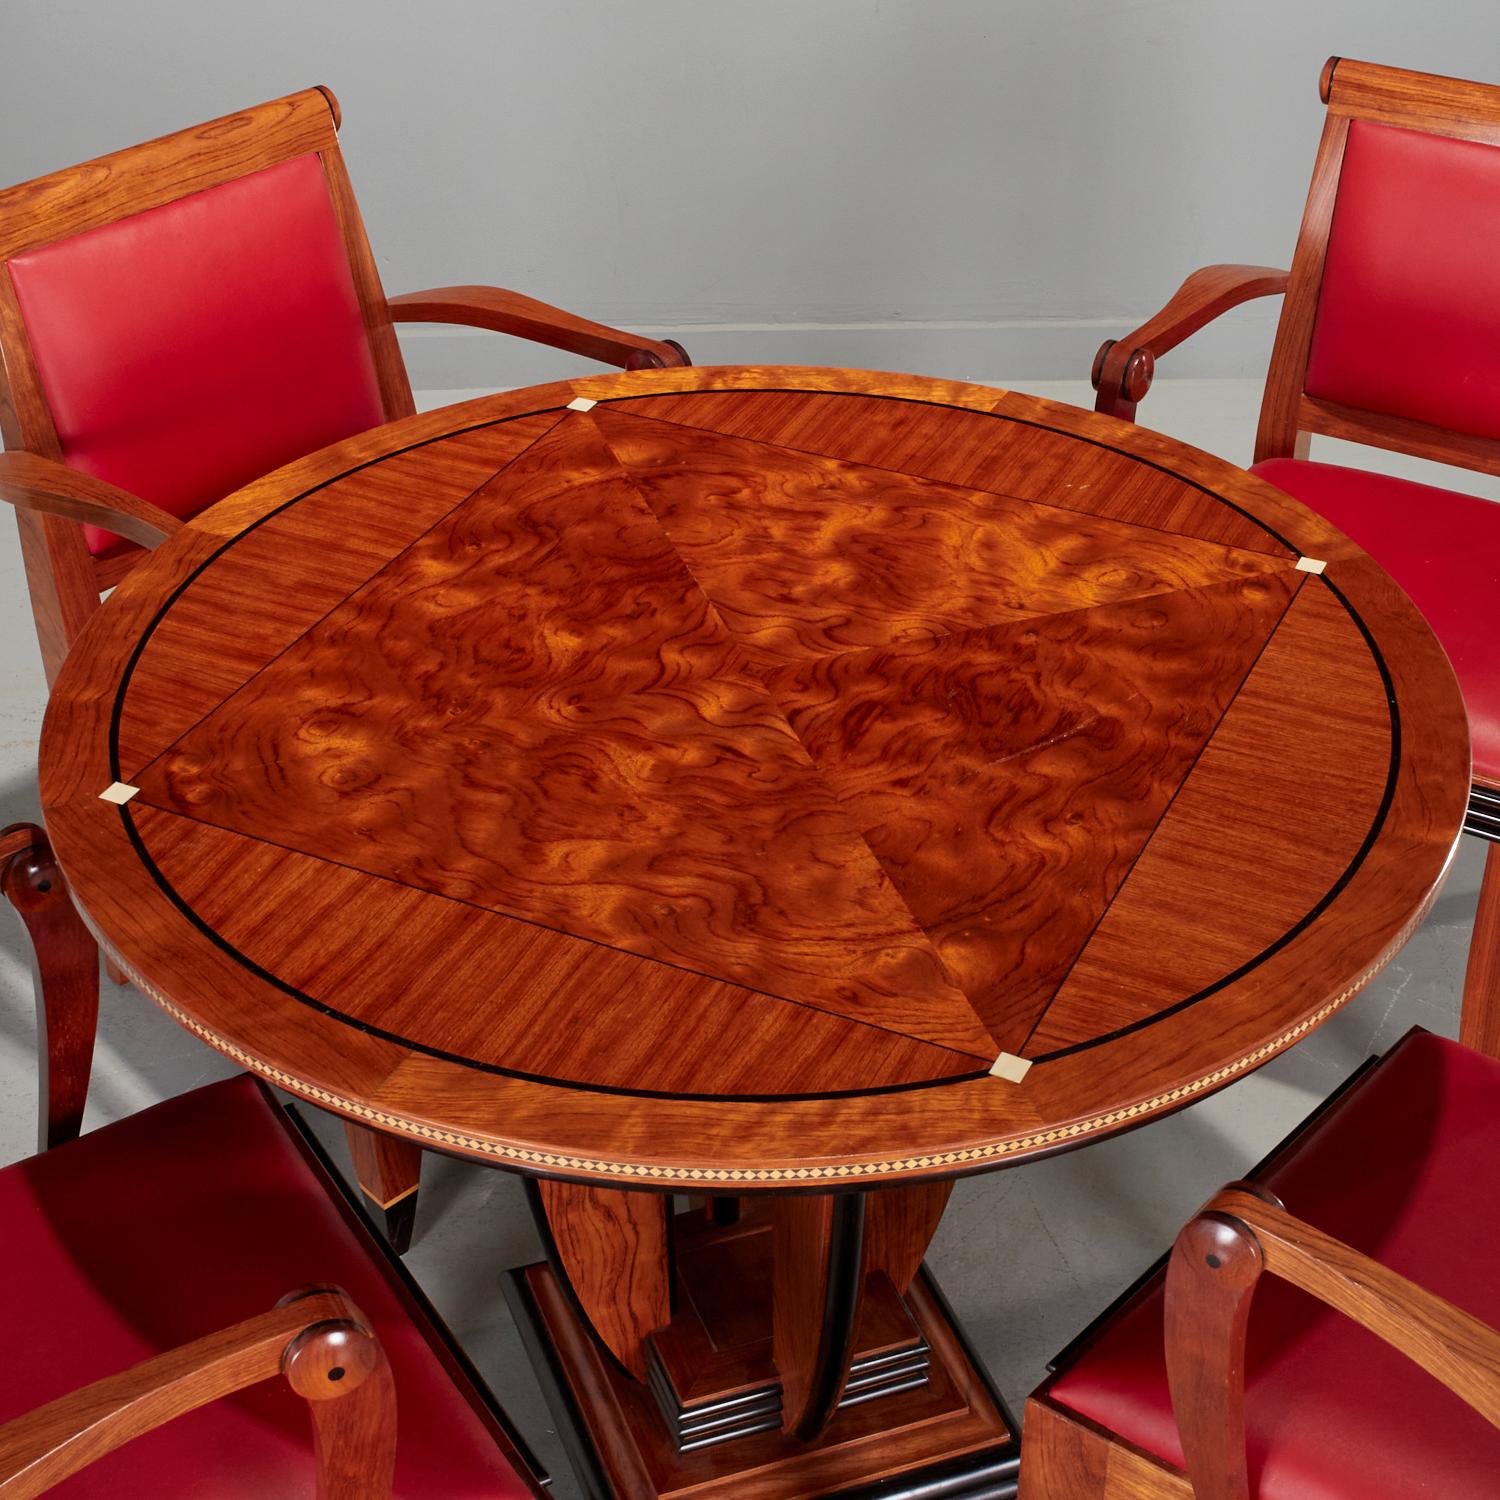 1989, USA, French Art Deco-inspired design. Beautifully constructed of bubinga and ebony, the table raised on open columned standard and central stepped plinth, with a circular inlaid top and four chairs with splayed legs, red upholstery, the backs